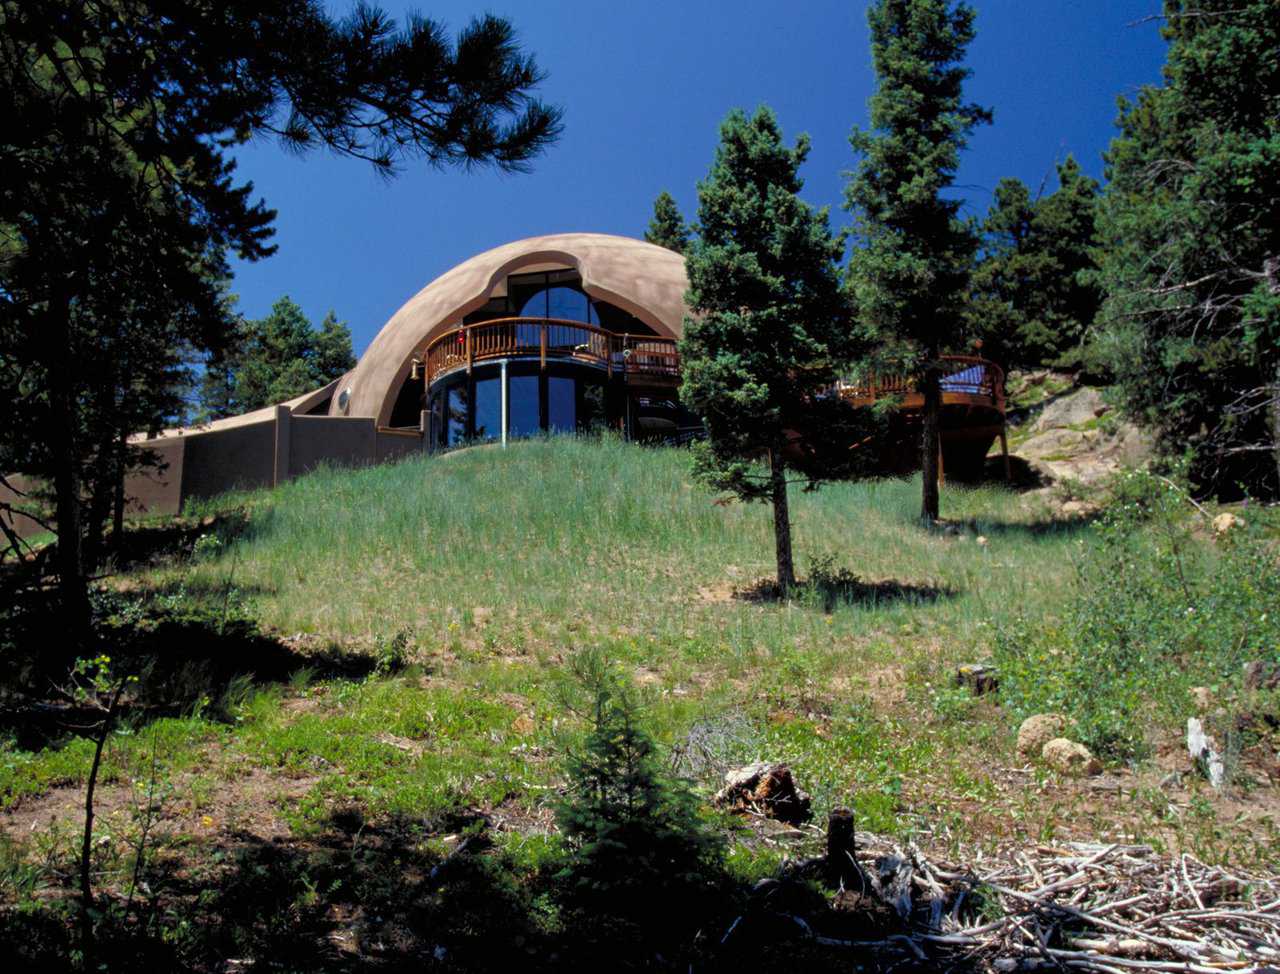 Love at first sight — The Garlocks said they immediately fell in love with the nonconventional design of their dome-home.